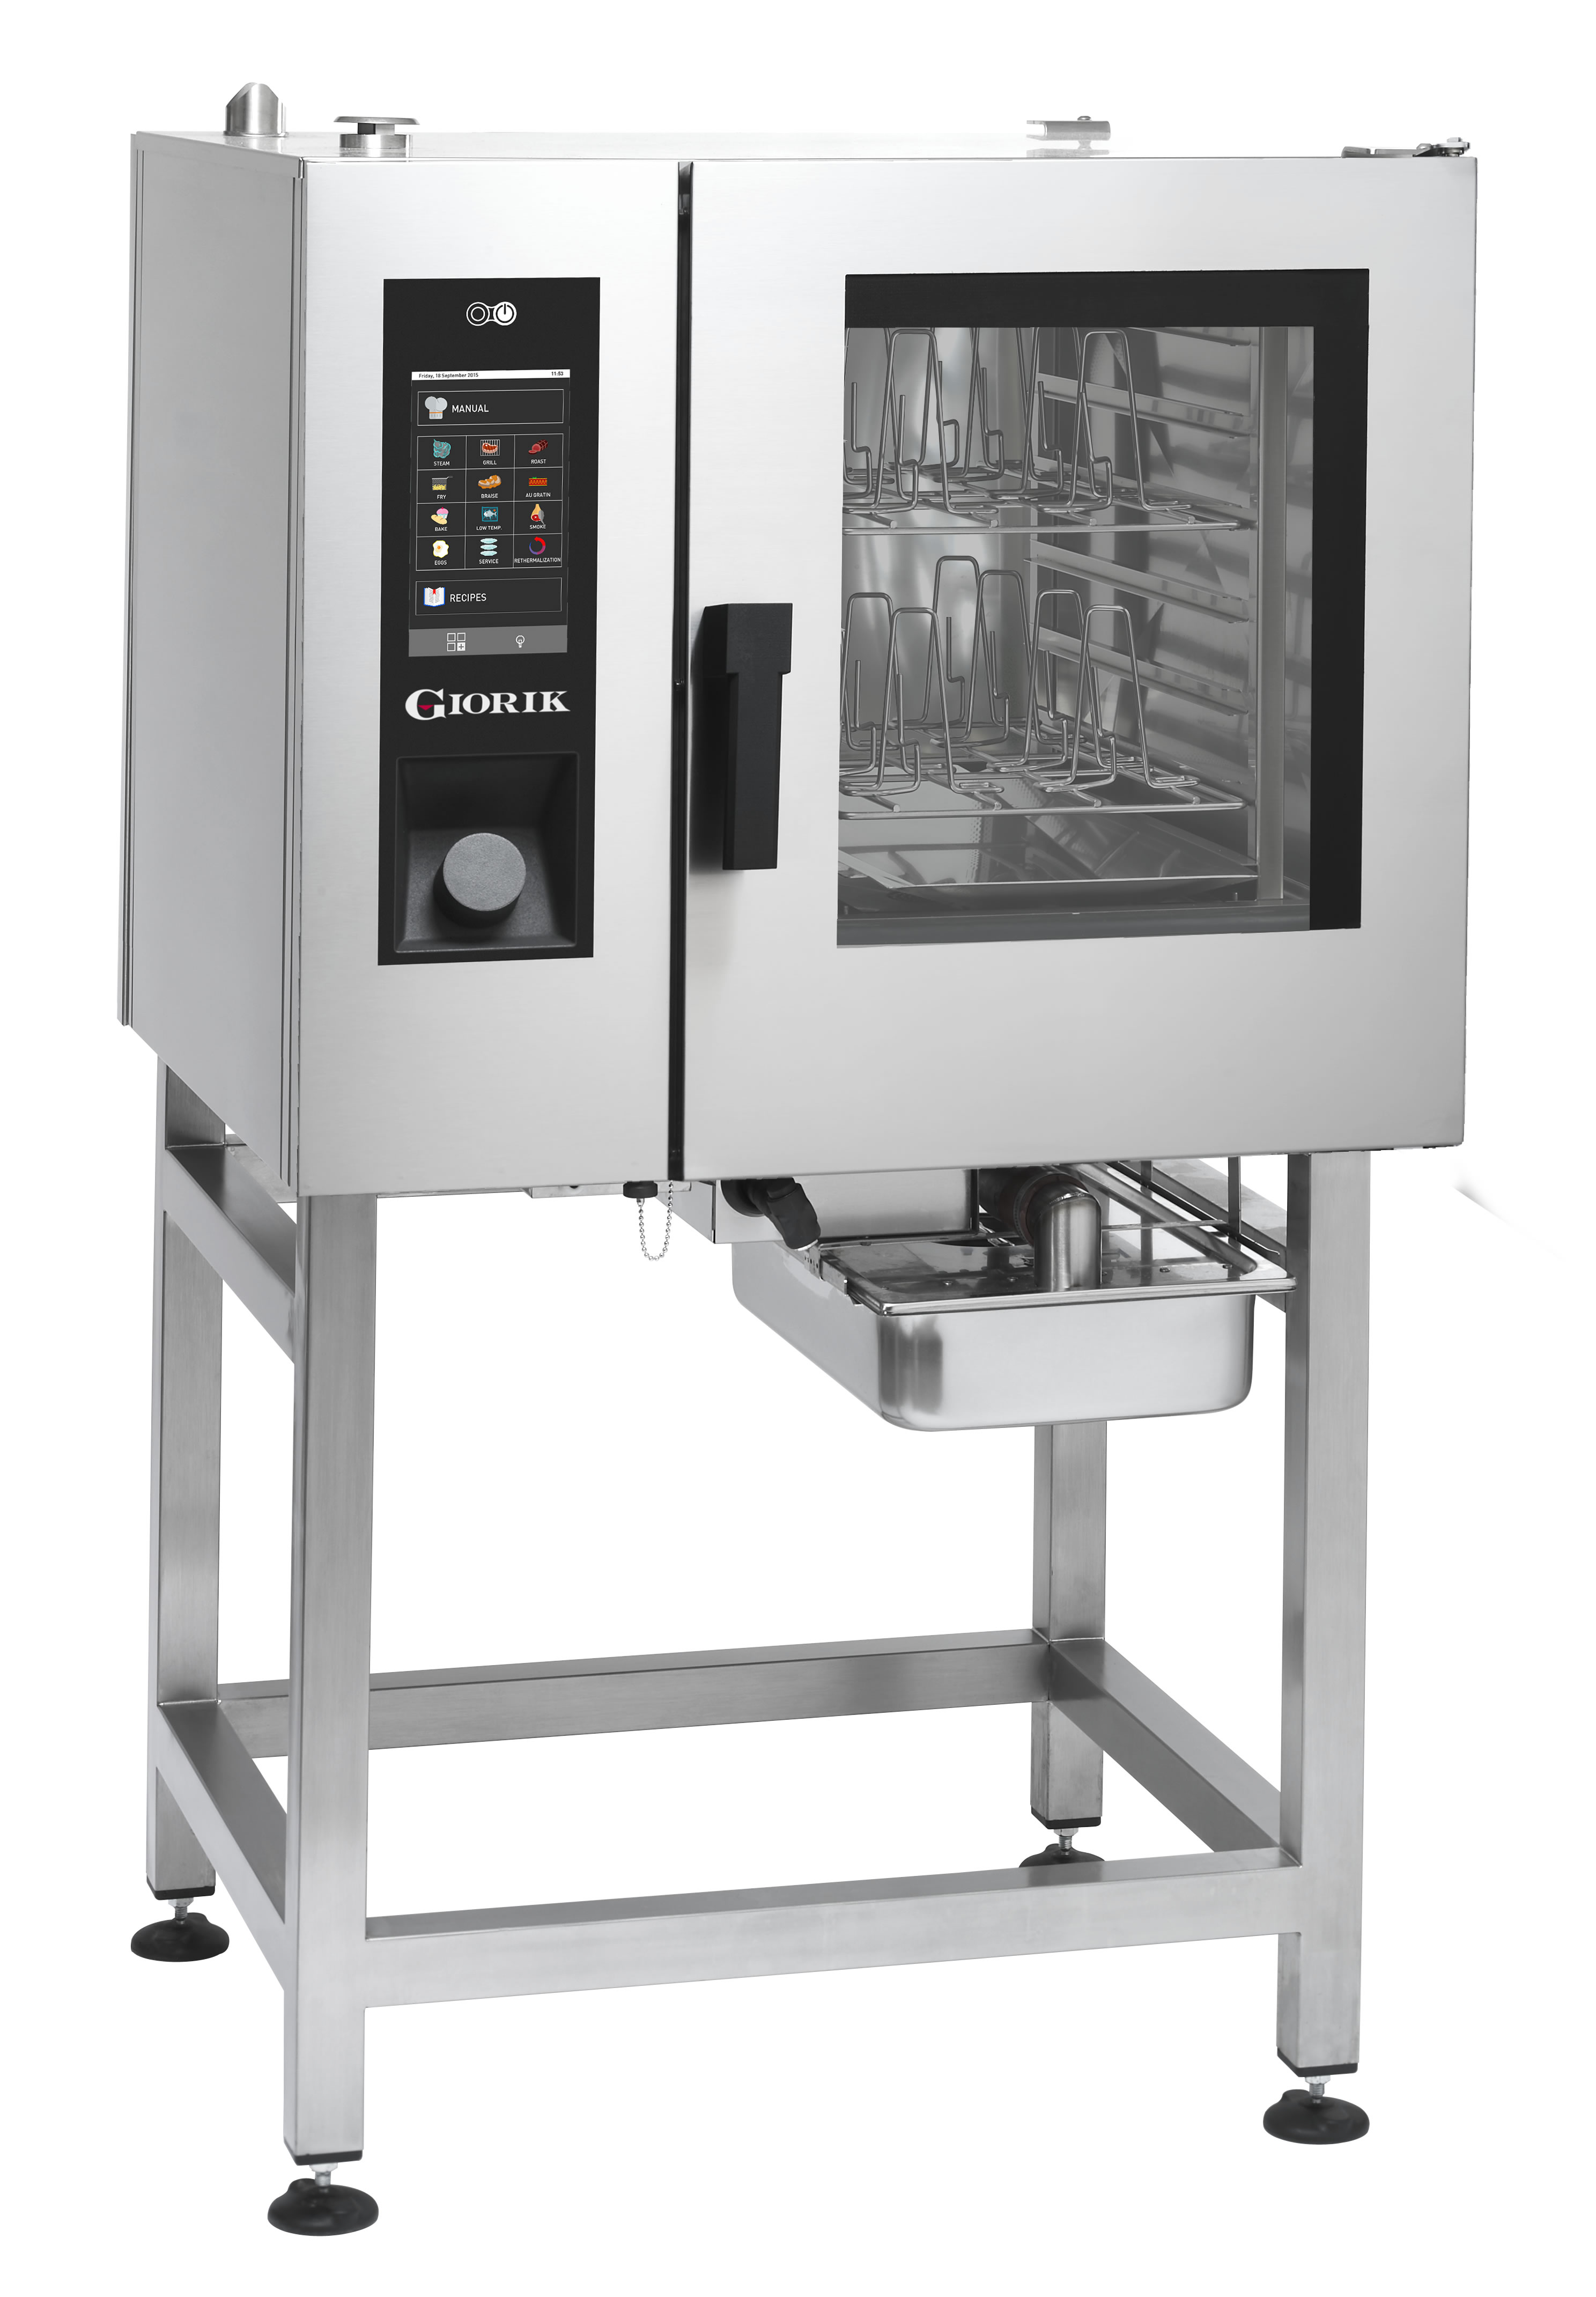 Rooster Booster Combi oven for chicken